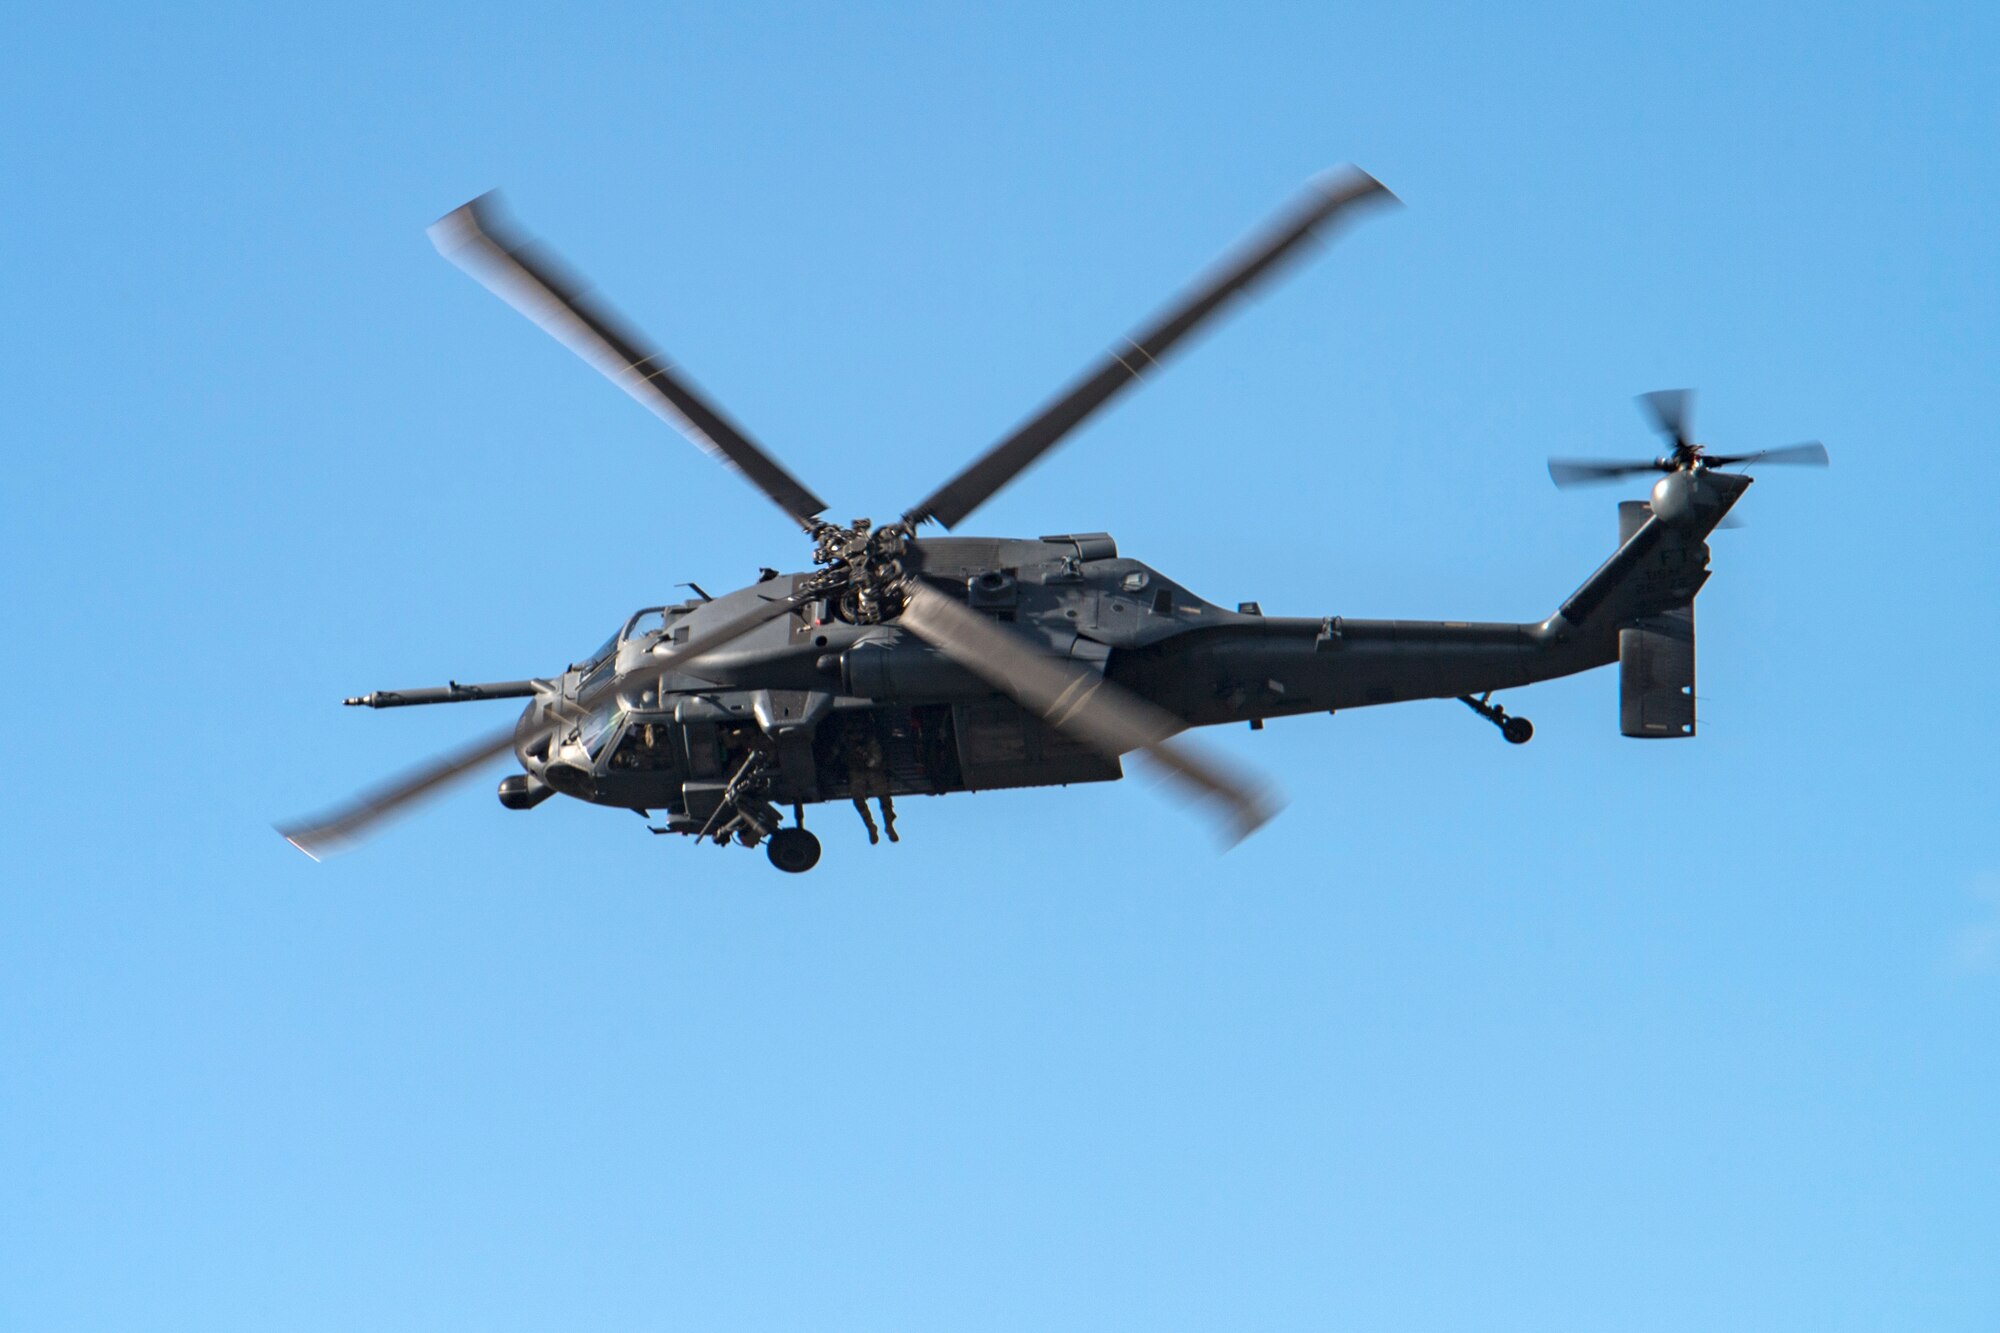 An HH-60G Pave Hawk executes tactical maneuvers, Aug. 15, 2018, at Avon Park Air Force Range, Fla. Airmen from the 41st Rescue Squadron and 41st Helicopter Maintenance Unit traveled to Patrick Air Force Base, Fla. to participate in a spin-up exercise. During the exercise, Airmen faced scenarios and situations they may encounter downrange. (U.S. Air Force photo by Senior Airman Janiqua P. Robinson)